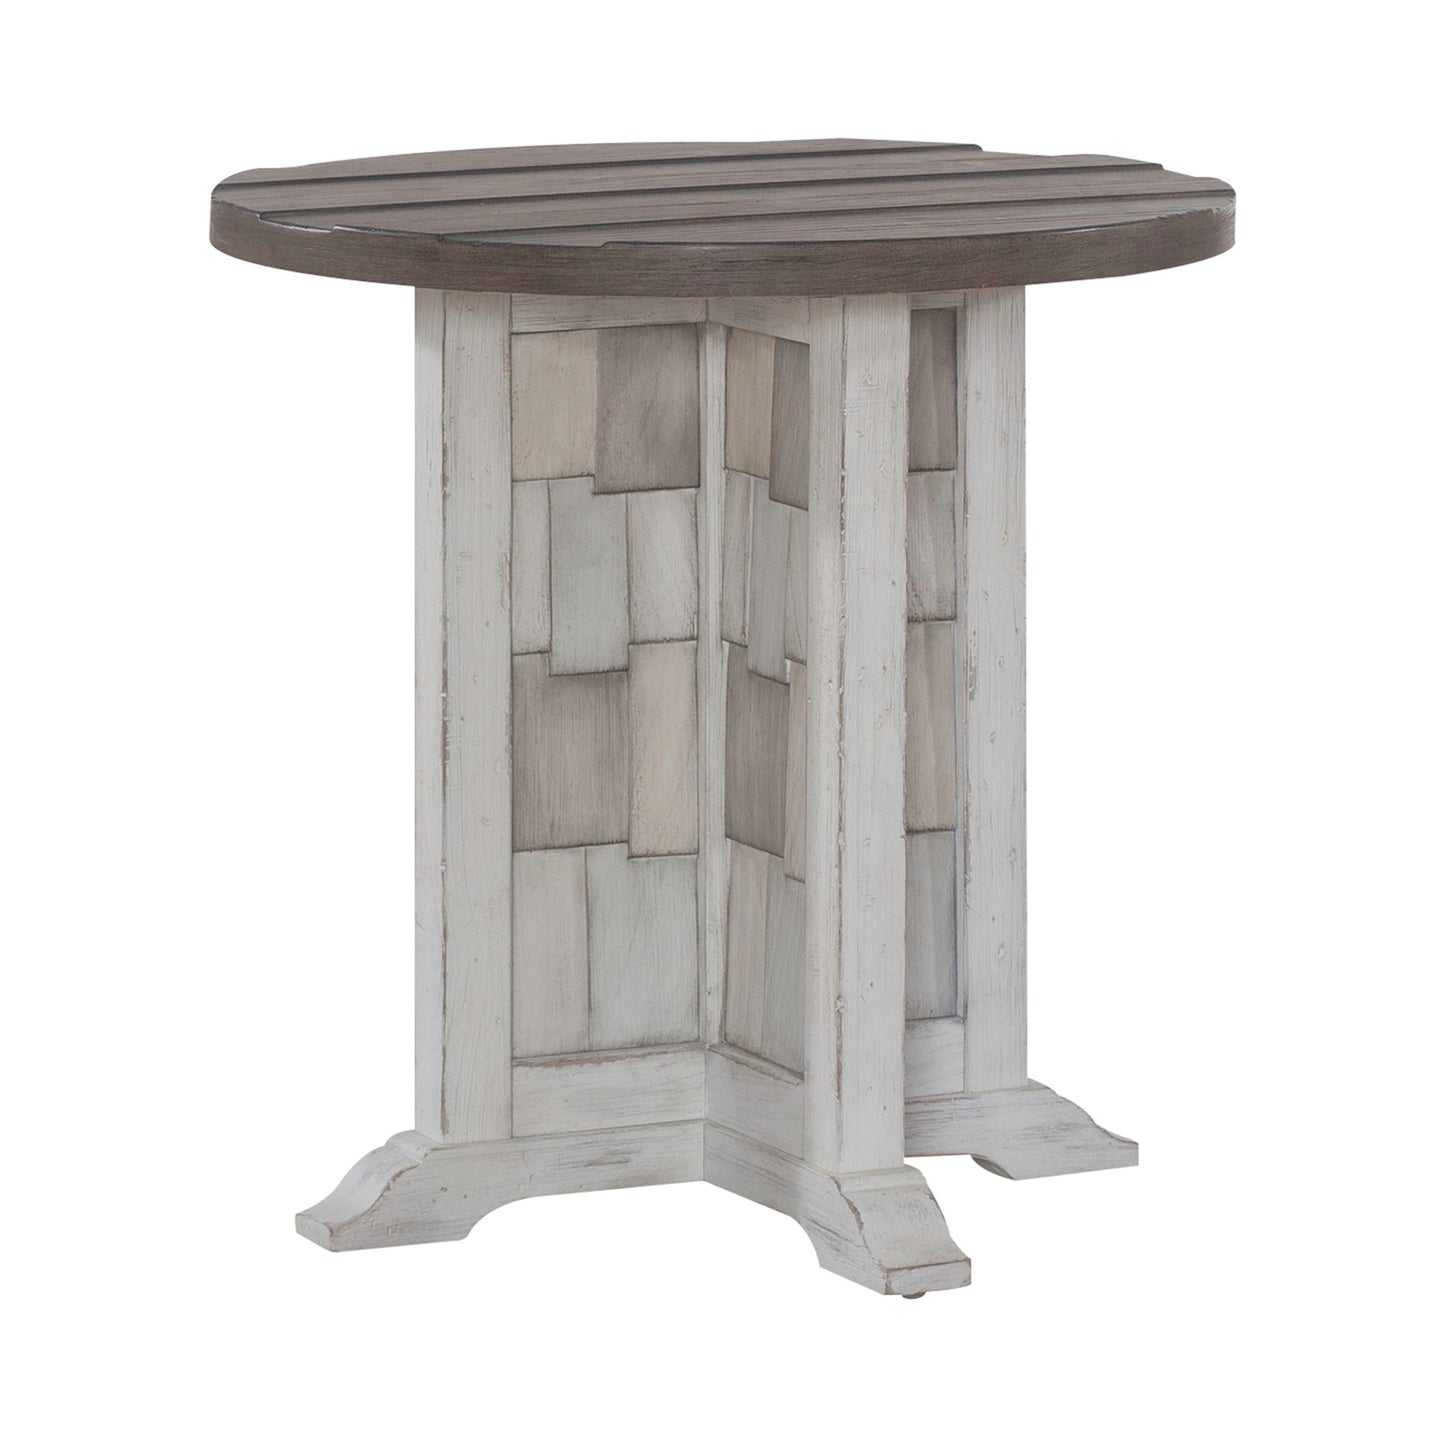 River Place - Round Chairside Table - White